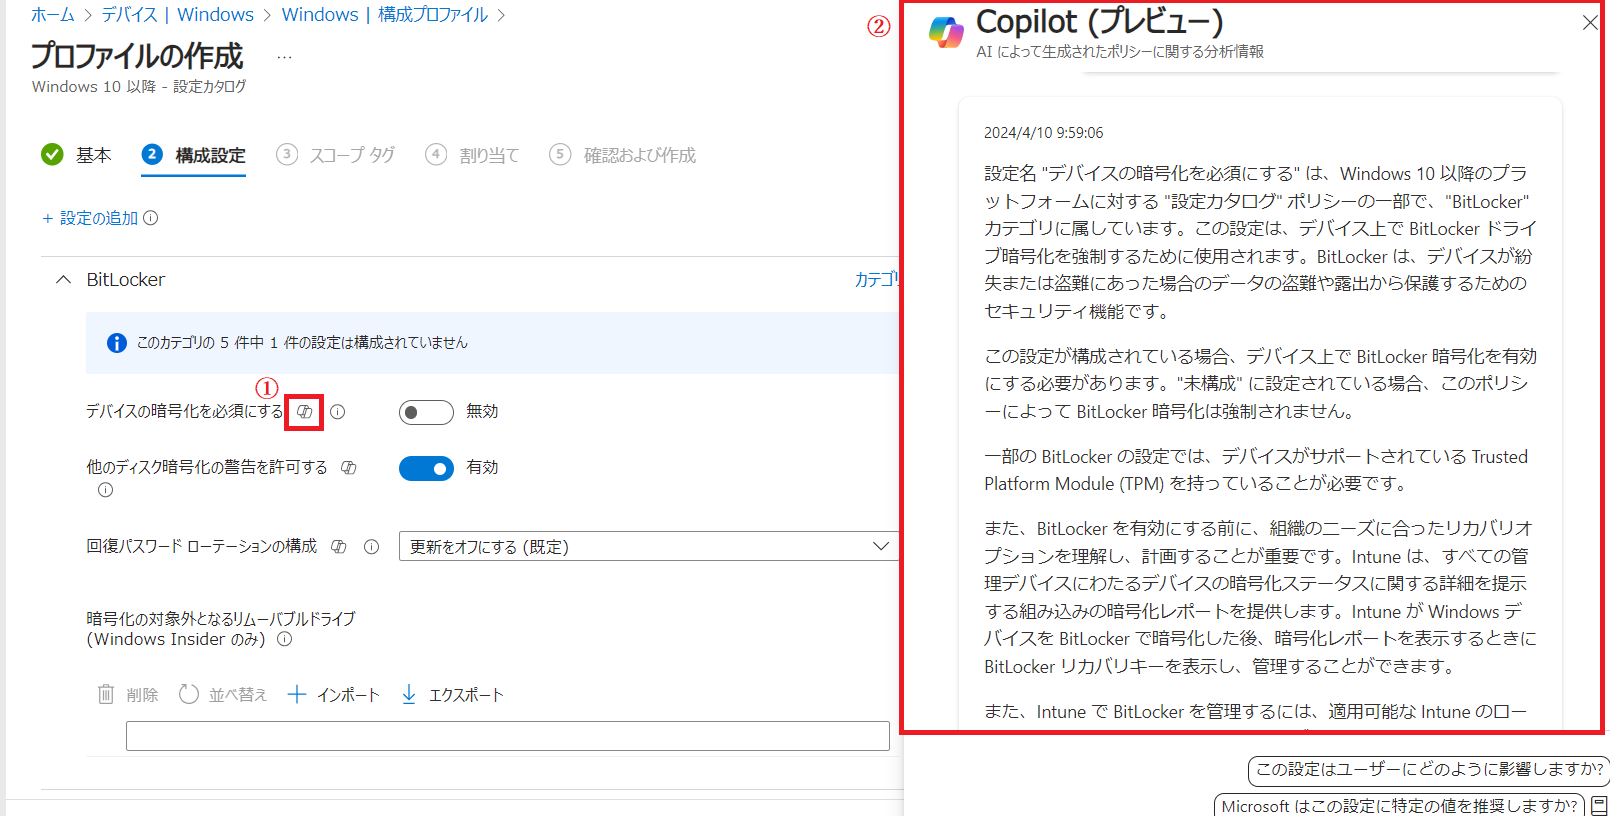 Microsoft Copilot for Security_触ってみた_10.png